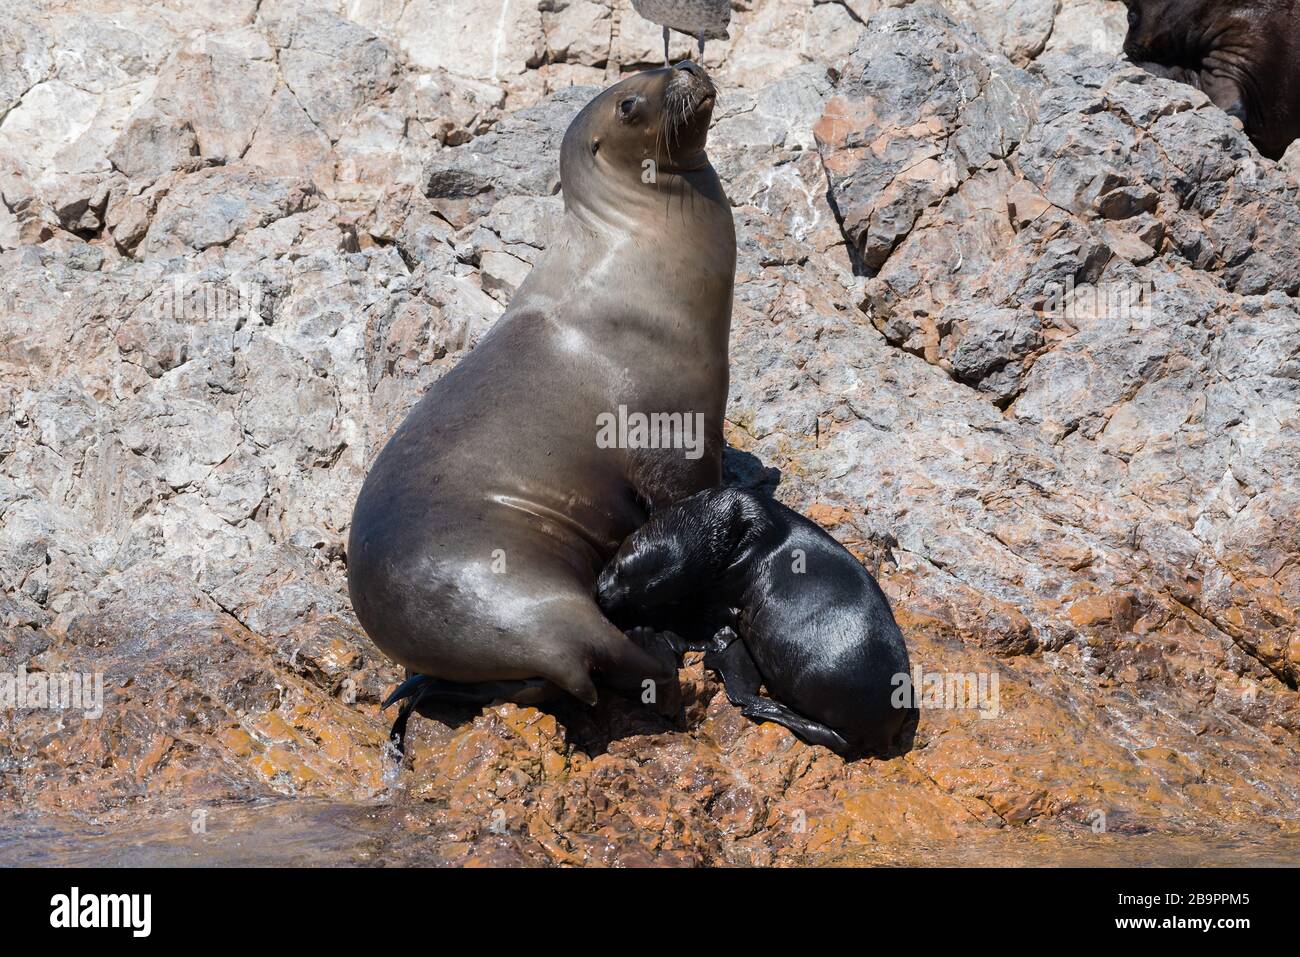 Sea lion mother suckles her baby, Beagle Channel, Argentina Stock Photo